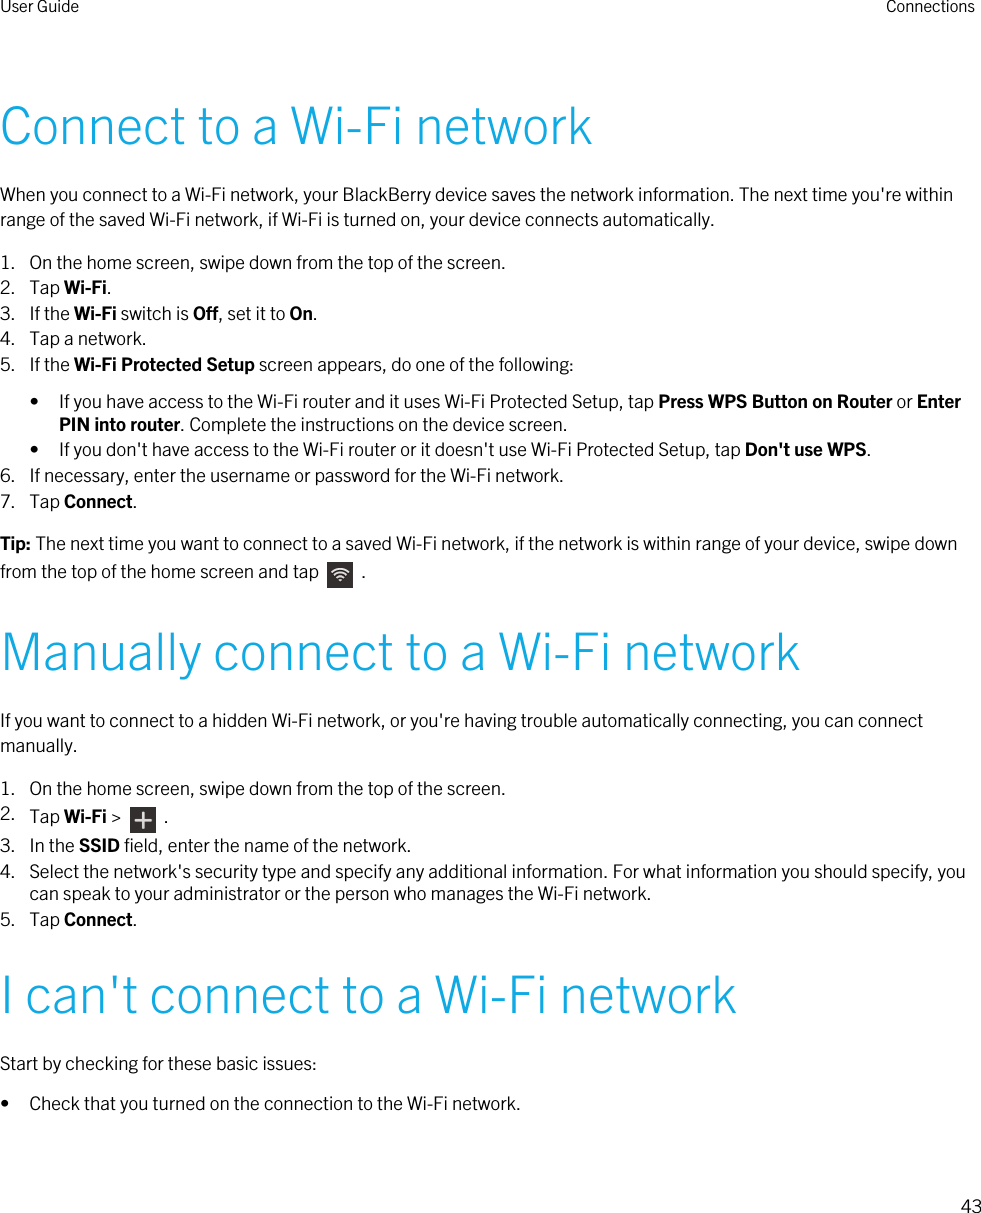 Connect to a Wi-Fi networkWhen you connect to a Wi-Fi network, your BlackBerry device saves the network information. The next time you&apos;re within range of the saved Wi-Fi network, if Wi-Fi is turned on, your device connects automatically.1. On the home screen, swipe down from the top of the screen.2. Tap Wi-Fi.3. If the Wi-Fi switch is Off, set it to On.4. Tap a network.5. If the Wi-Fi Protected Setup screen appears, do one of the following:• If you have access to the Wi-Fi router and it uses Wi-Fi Protected Setup, tap Press WPS Button on Router or Enter PIN into router. Complete the instructions on the device screen.• If you don&apos;t have access to the Wi-Fi router or it doesn&apos;t use Wi-Fi Protected Setup, tap Don&apos;t use WPS.6. If necessary, enter the username or password for the Wi-Fi network.7. Tap Connect.Tip: The next time you want to connect to a saved Wi-Fi network, if the network is within range of your device, swipe down from the top of the home screen and tap    .Manually connect to a Wi-Fi networkIf you want to connect to a hidden Wi-Fi network, or you&apos;re having trouble automatically connecting, you can connect manually.1. On the home screen, swipe down from the top of the screen.2. Tap Wi-Fi &gt;    .3. In the SSID field, enter the name of the network.4. Select the network&apos;s security type and specify any additional information. For what information you should specify, you can speak to your administrator or the person who manages the Wi-Fi network.5. Tap Connect.I can&apos;t connect to a Wi-Fi networkStart by checking for these basic issues:• Check that you turned on the connection to the Wi-Fi network.User Guide Connections43 